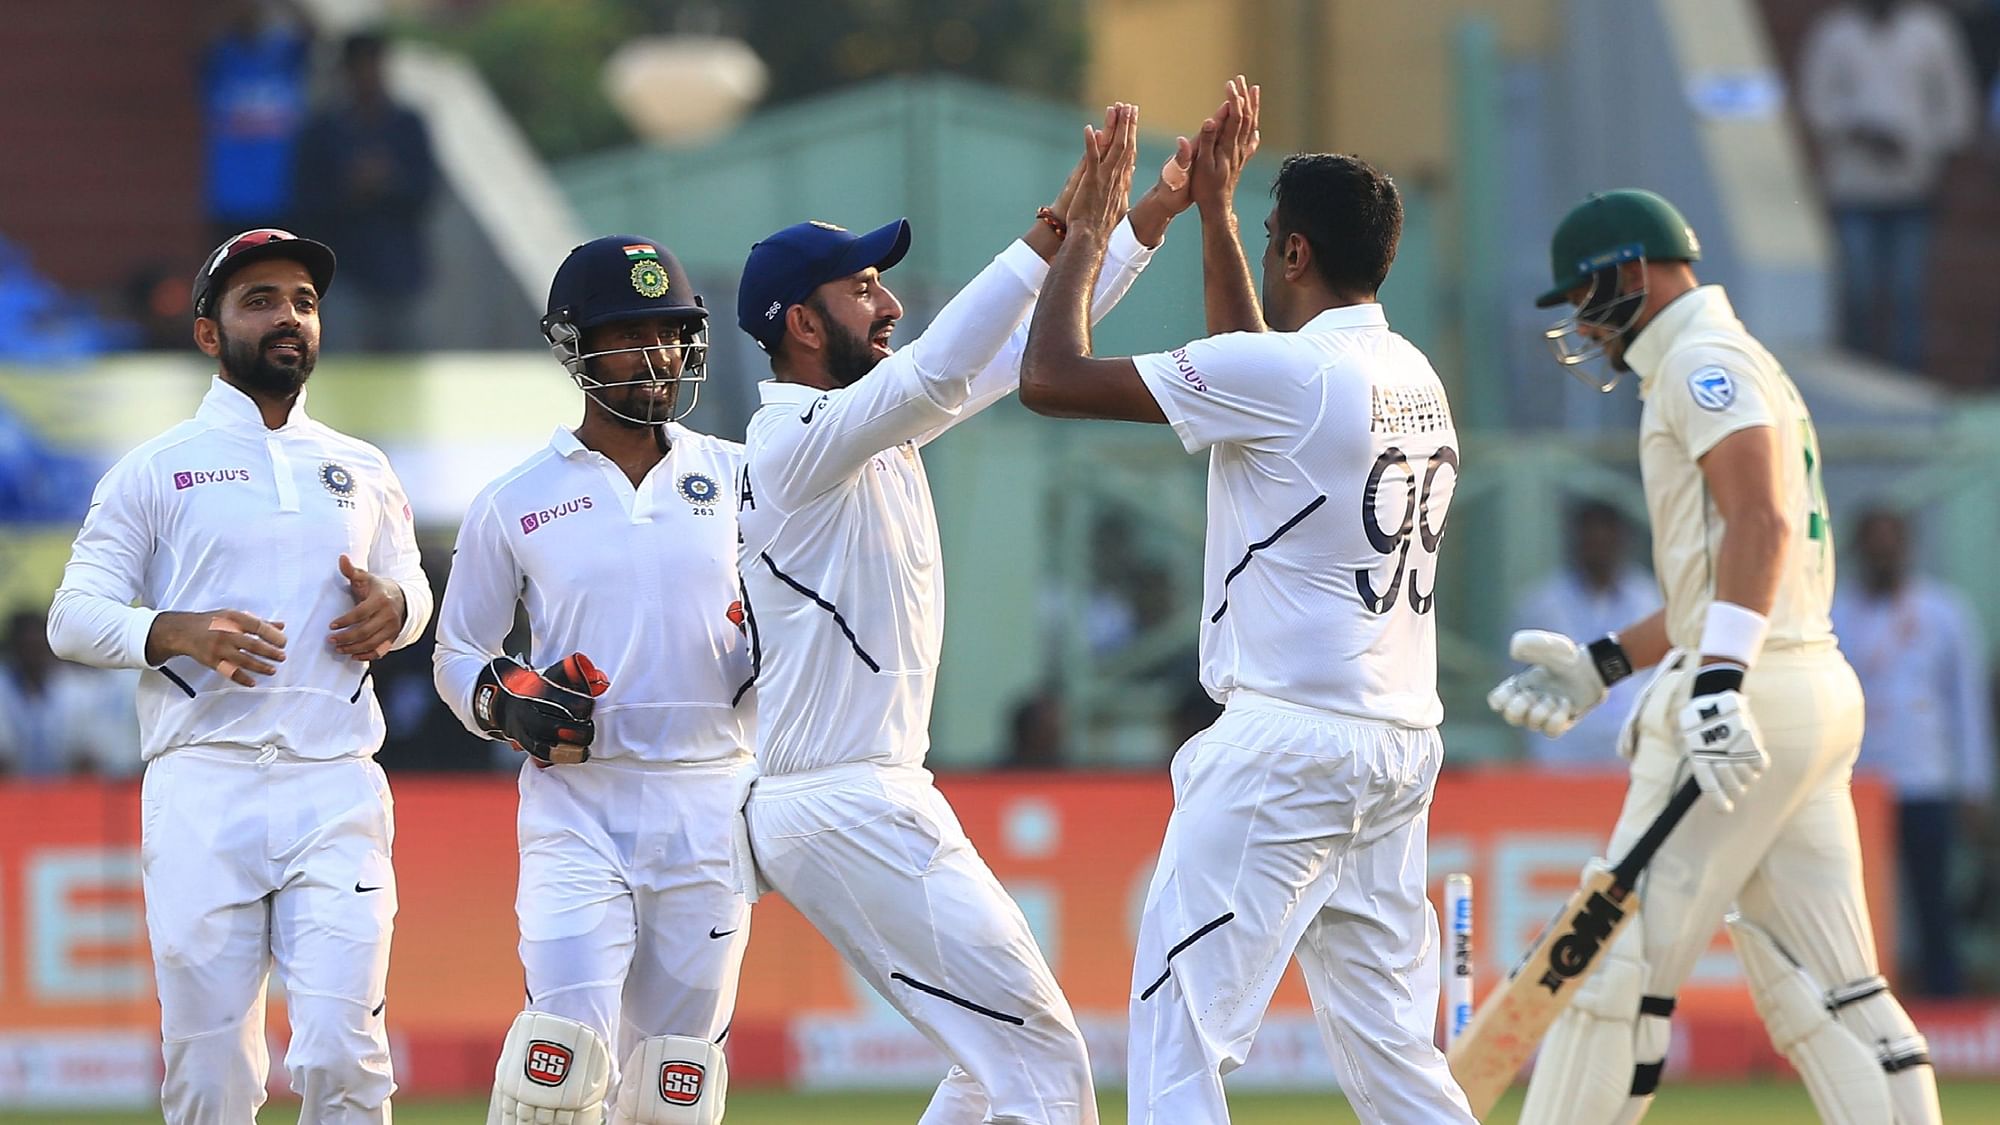 Team india players celebrate the wicket of Aiden Markram of South Africa during day 2 of the first test match.